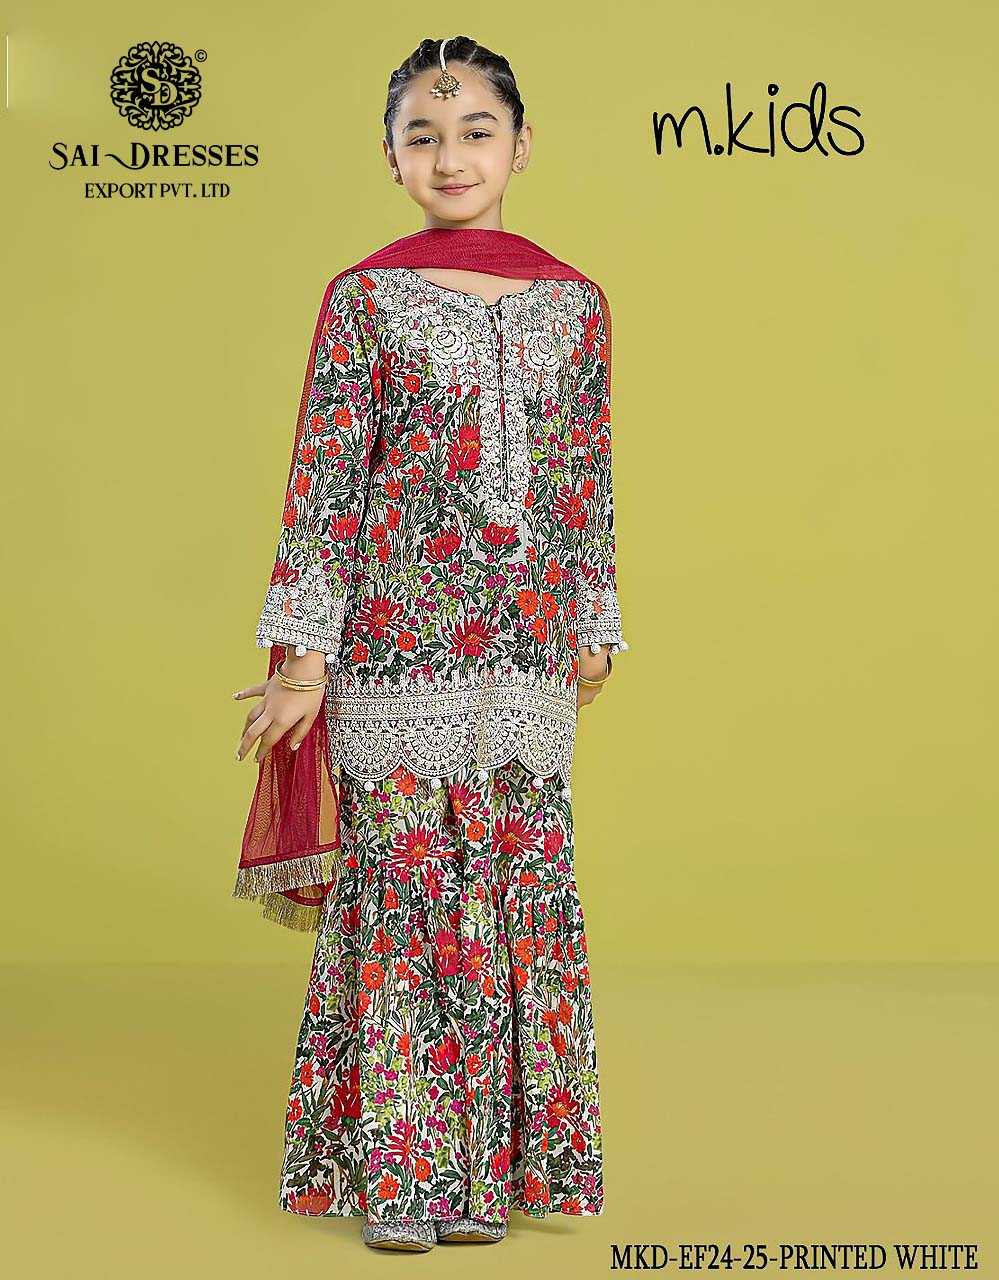 SAI DRESSES PRESENT D.NO 40 READY TO ETHENIC WEAR GHARARA STYLE DESIGNER PAKISTANI KIDS COMBO SUITS IN WHOLESALE RATE IN SURAT